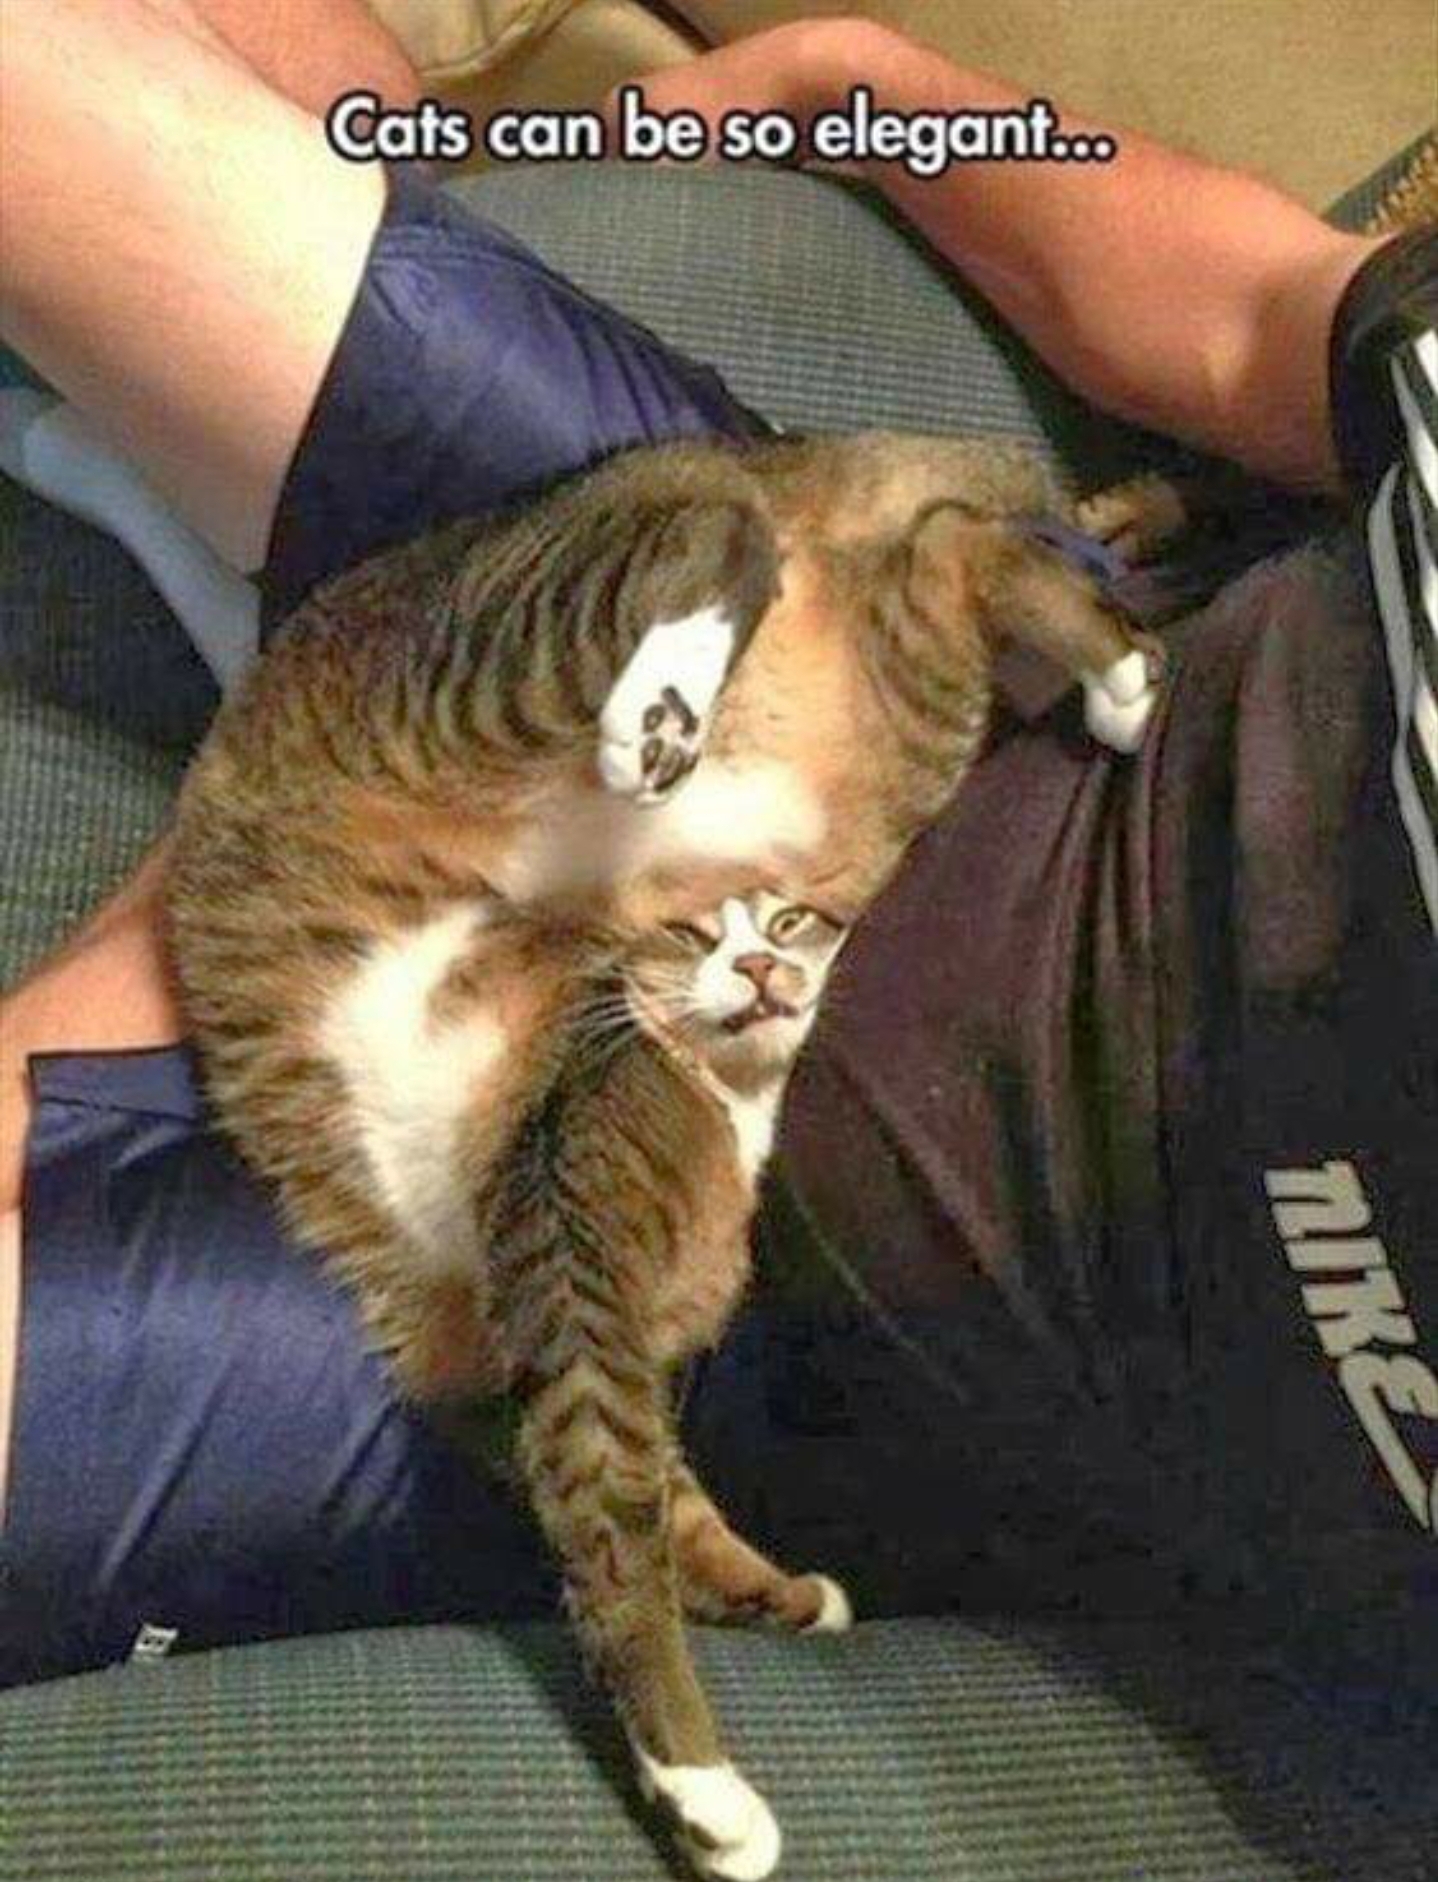 cats sleeping weird positions memes - Cats can be so elegant... Nike